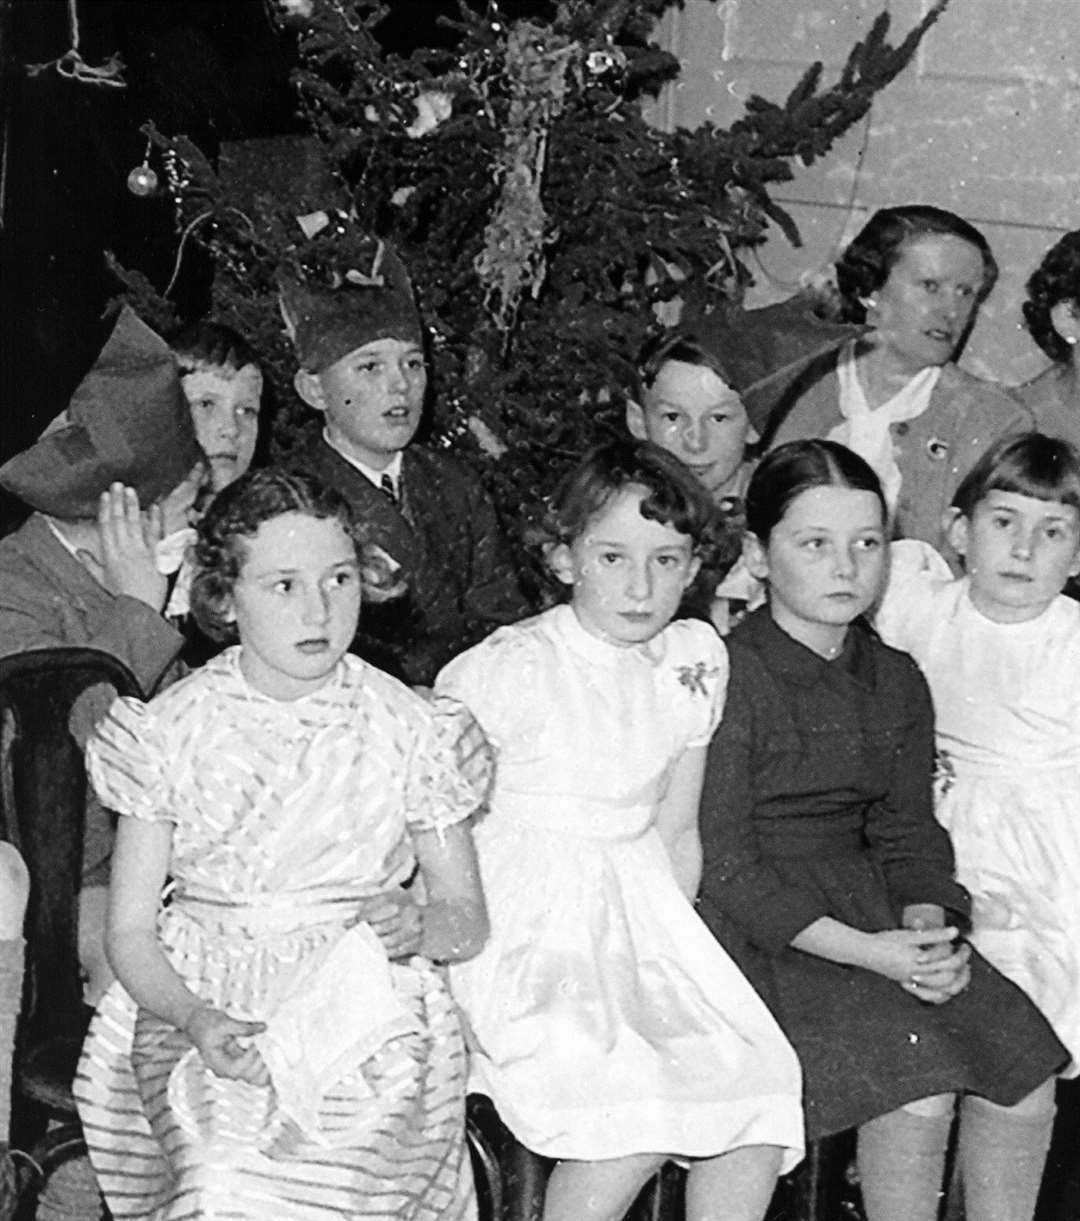 The Odeon function room was the scene of the annual police children's party at Christmas time in 1954. Picture: Countrywide Photographic